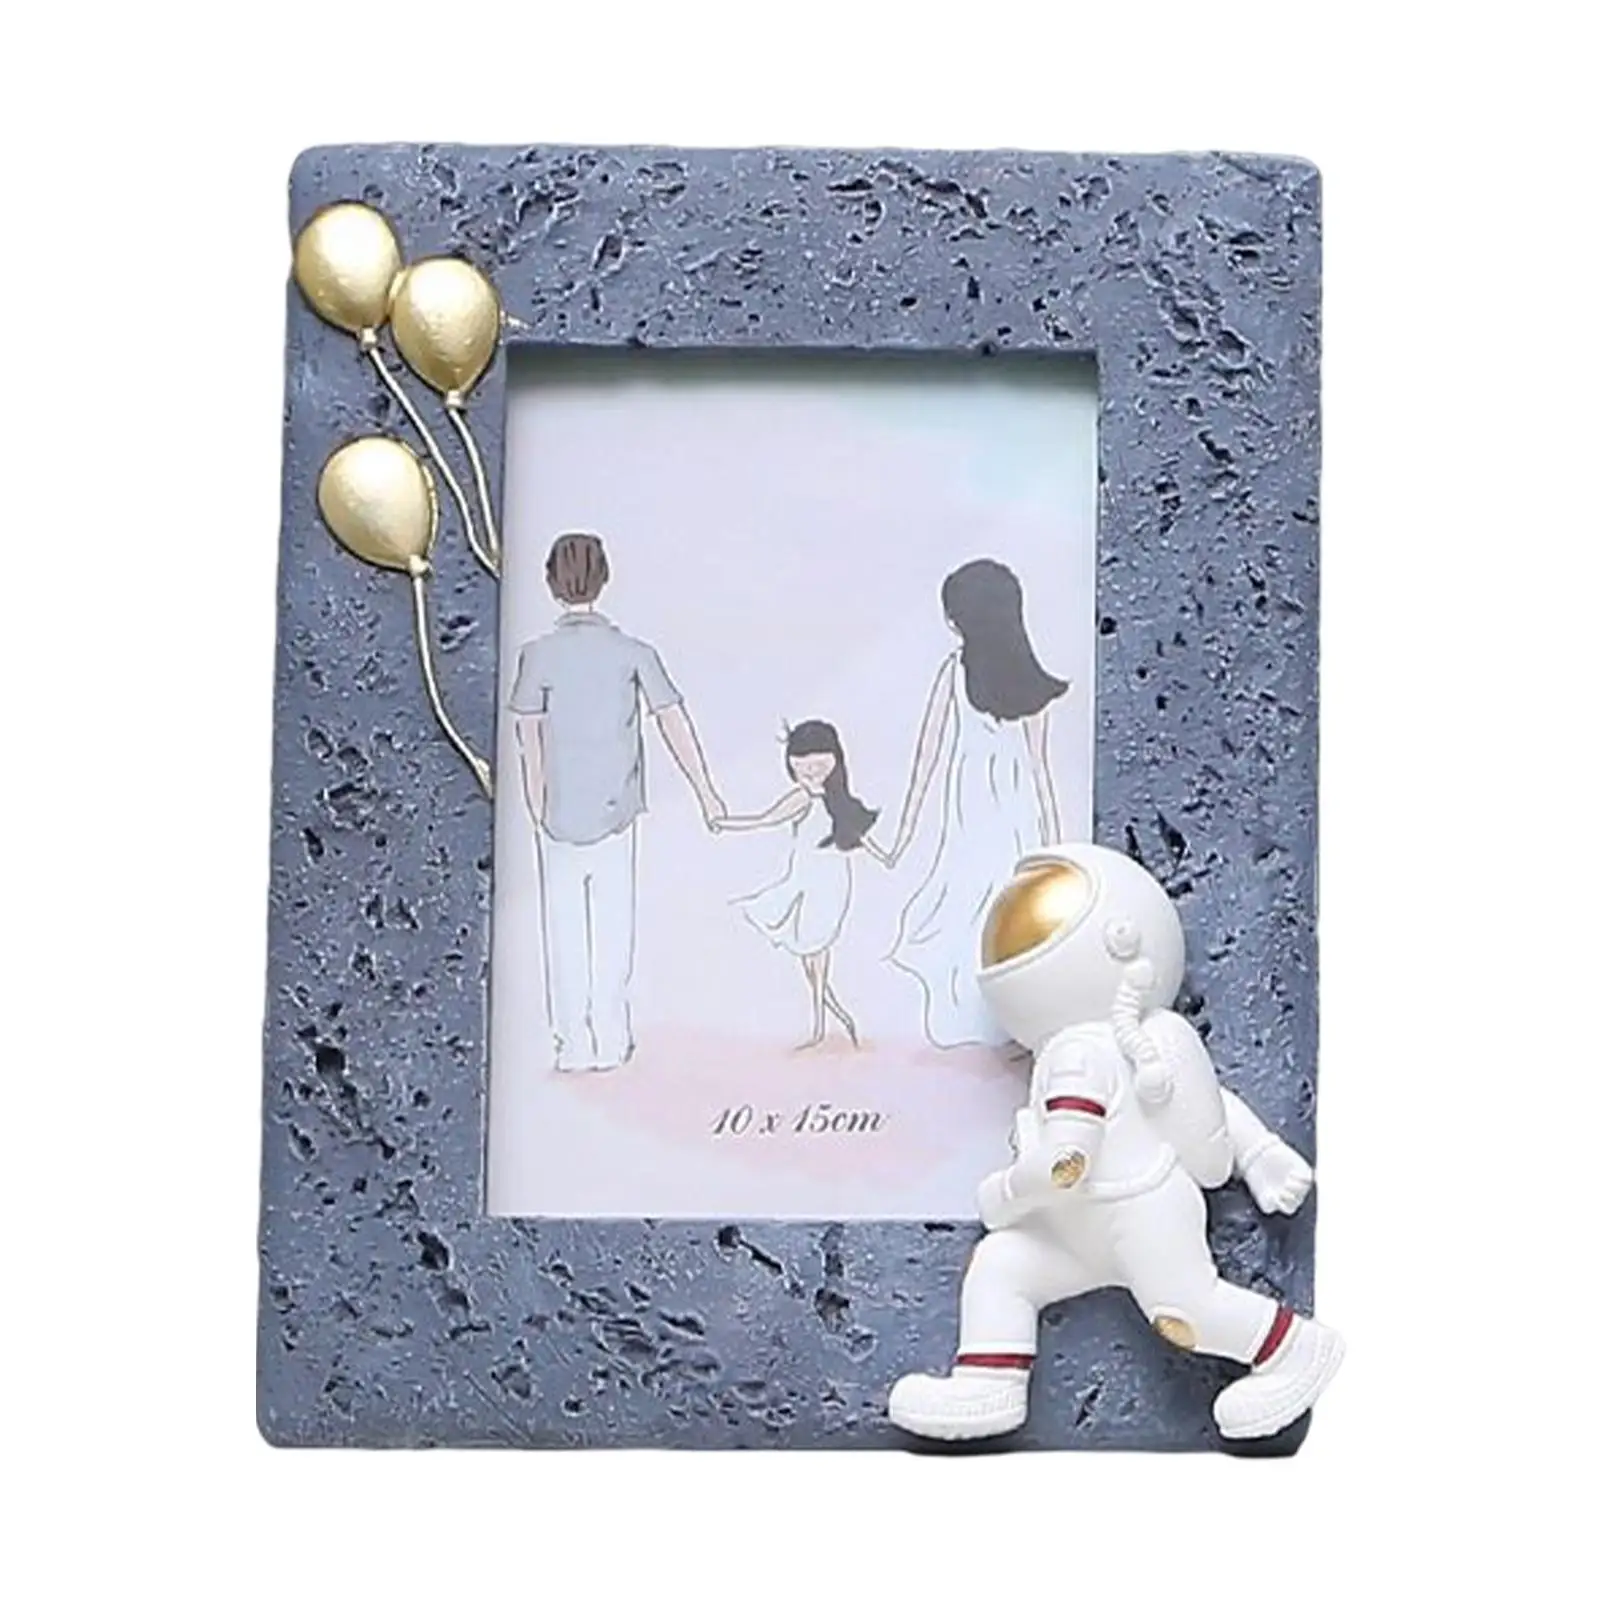 Modern Resin Astronaut Photo Wall & Table Top Frames for Family Home